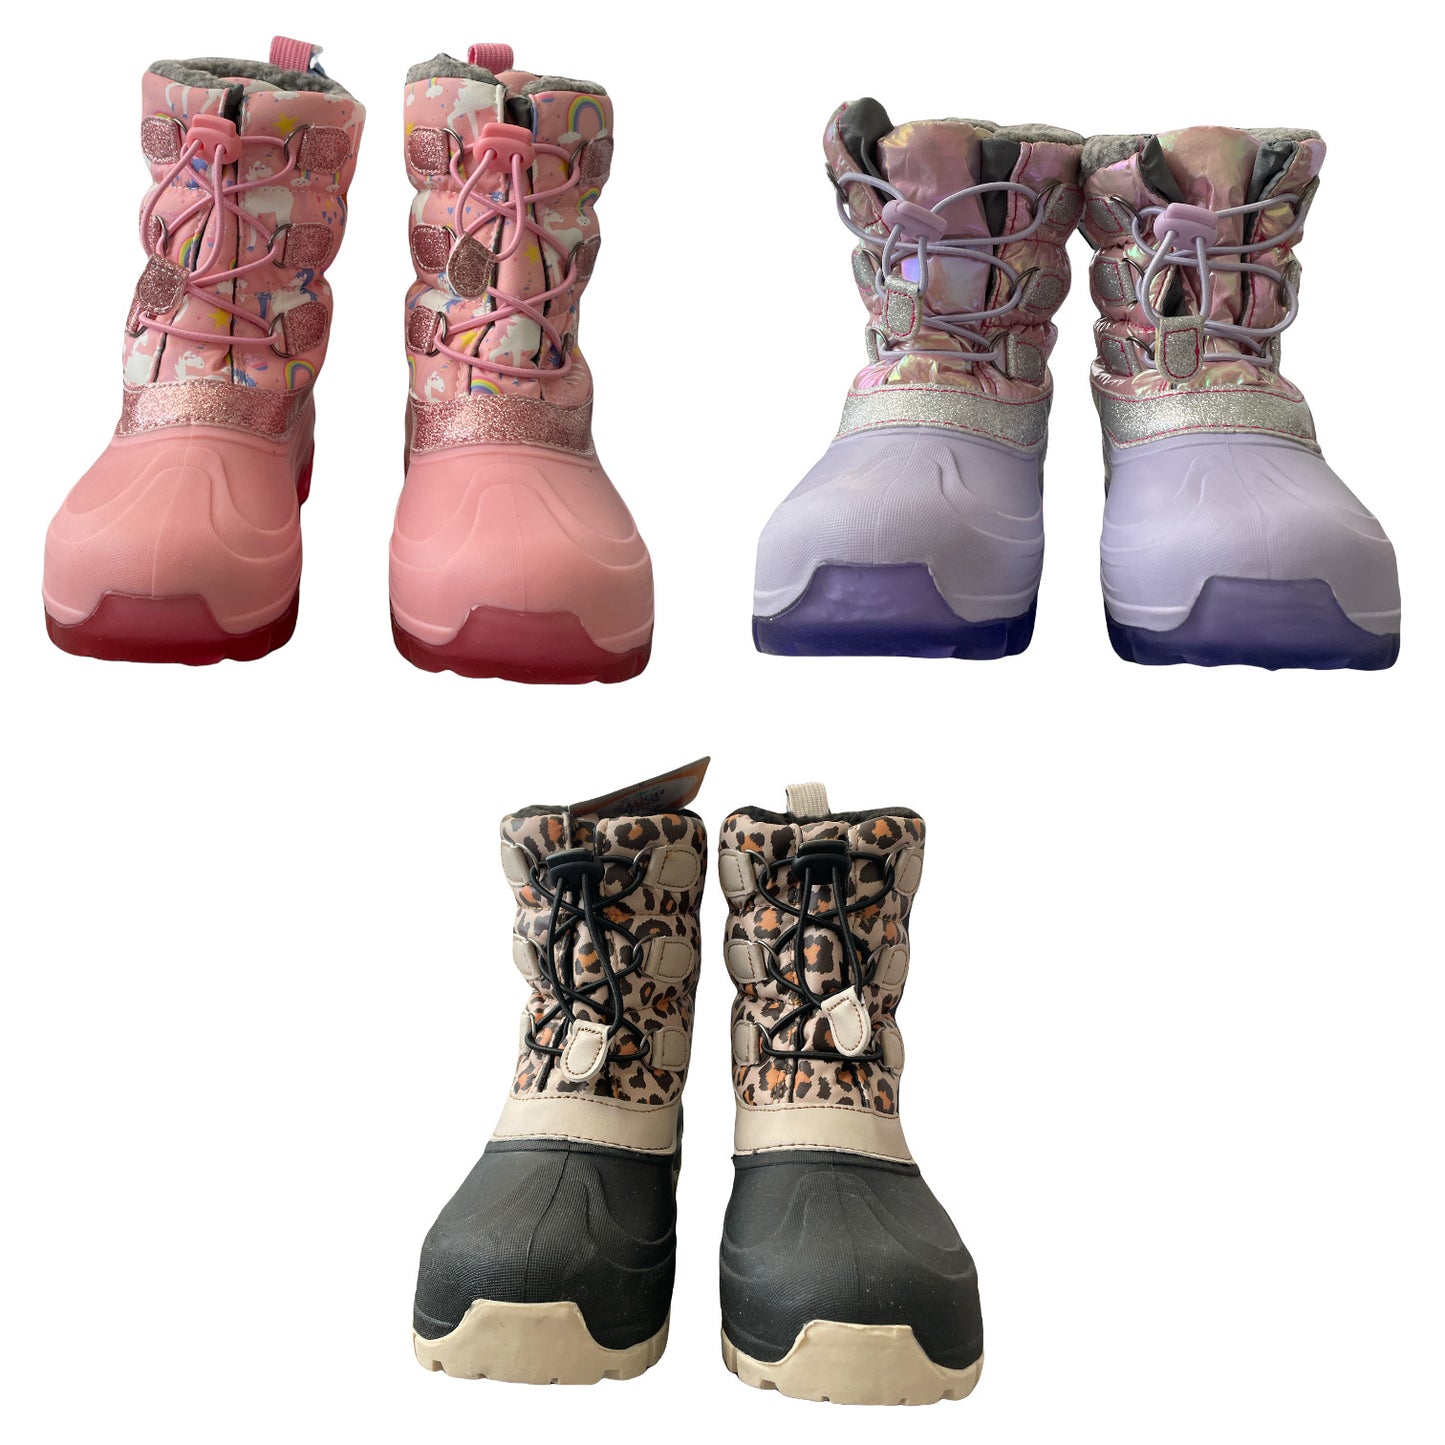 Member's Mark Toddler Girl's Water Resistant Snow Boot W/ Warm Lining